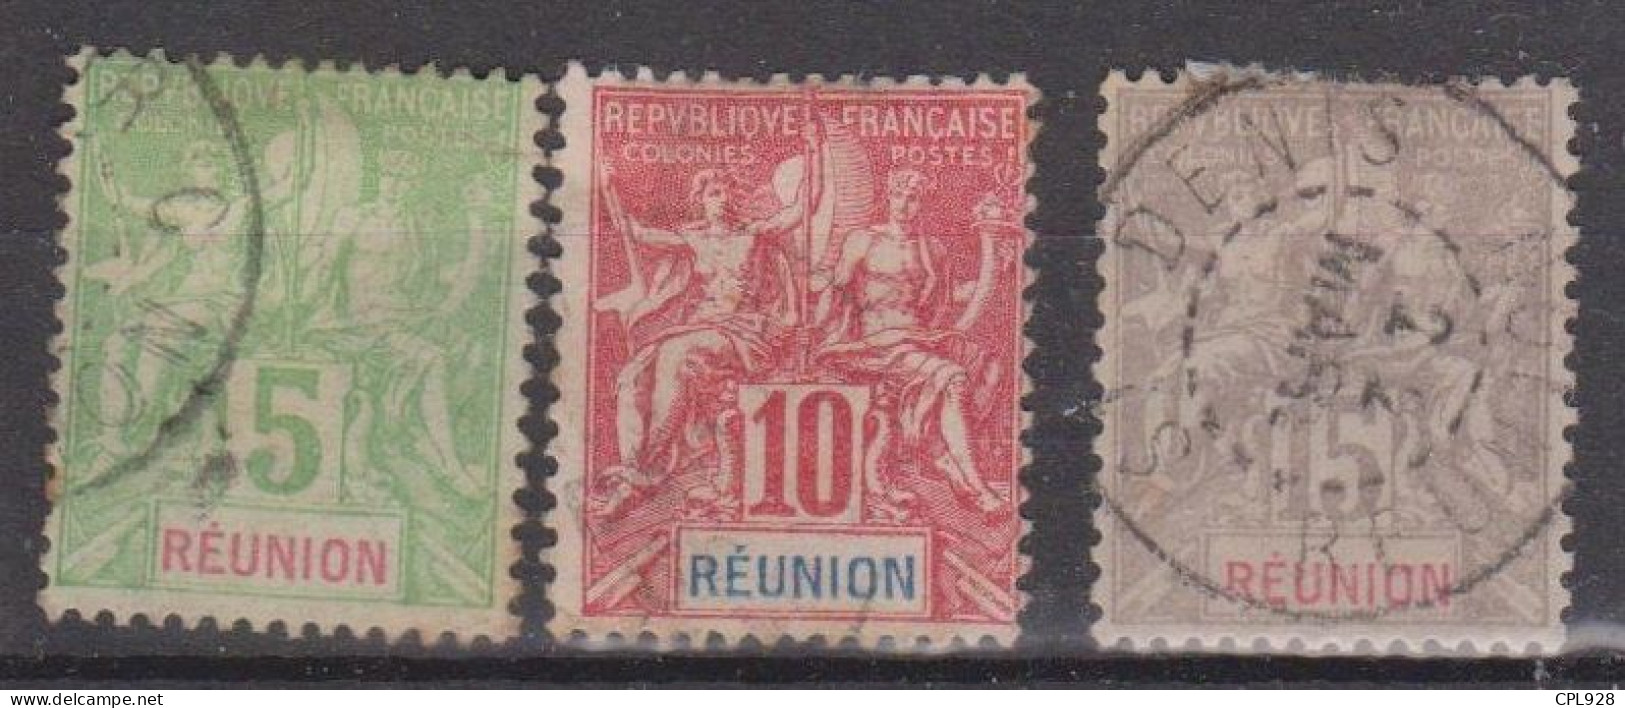 Réunion N° 46 Et 48 - Used Stamps